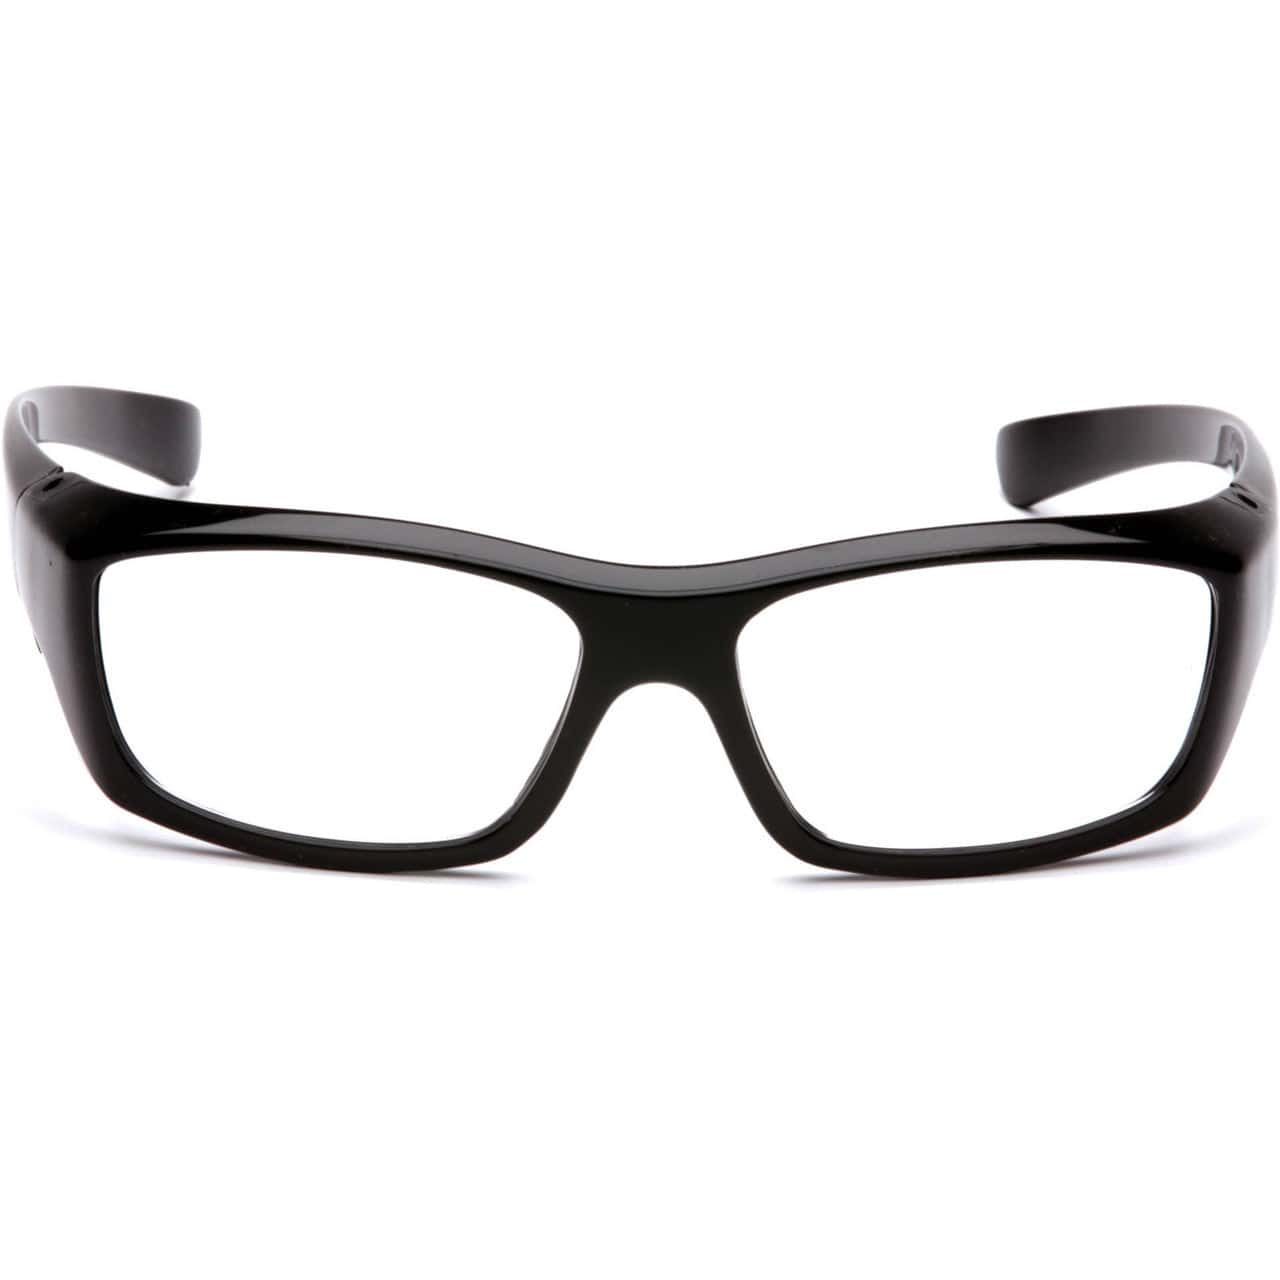 Pyramex Emerge Safety Glasses with Black Frame and Clear Full Magnifying Lens SB7910D Front View